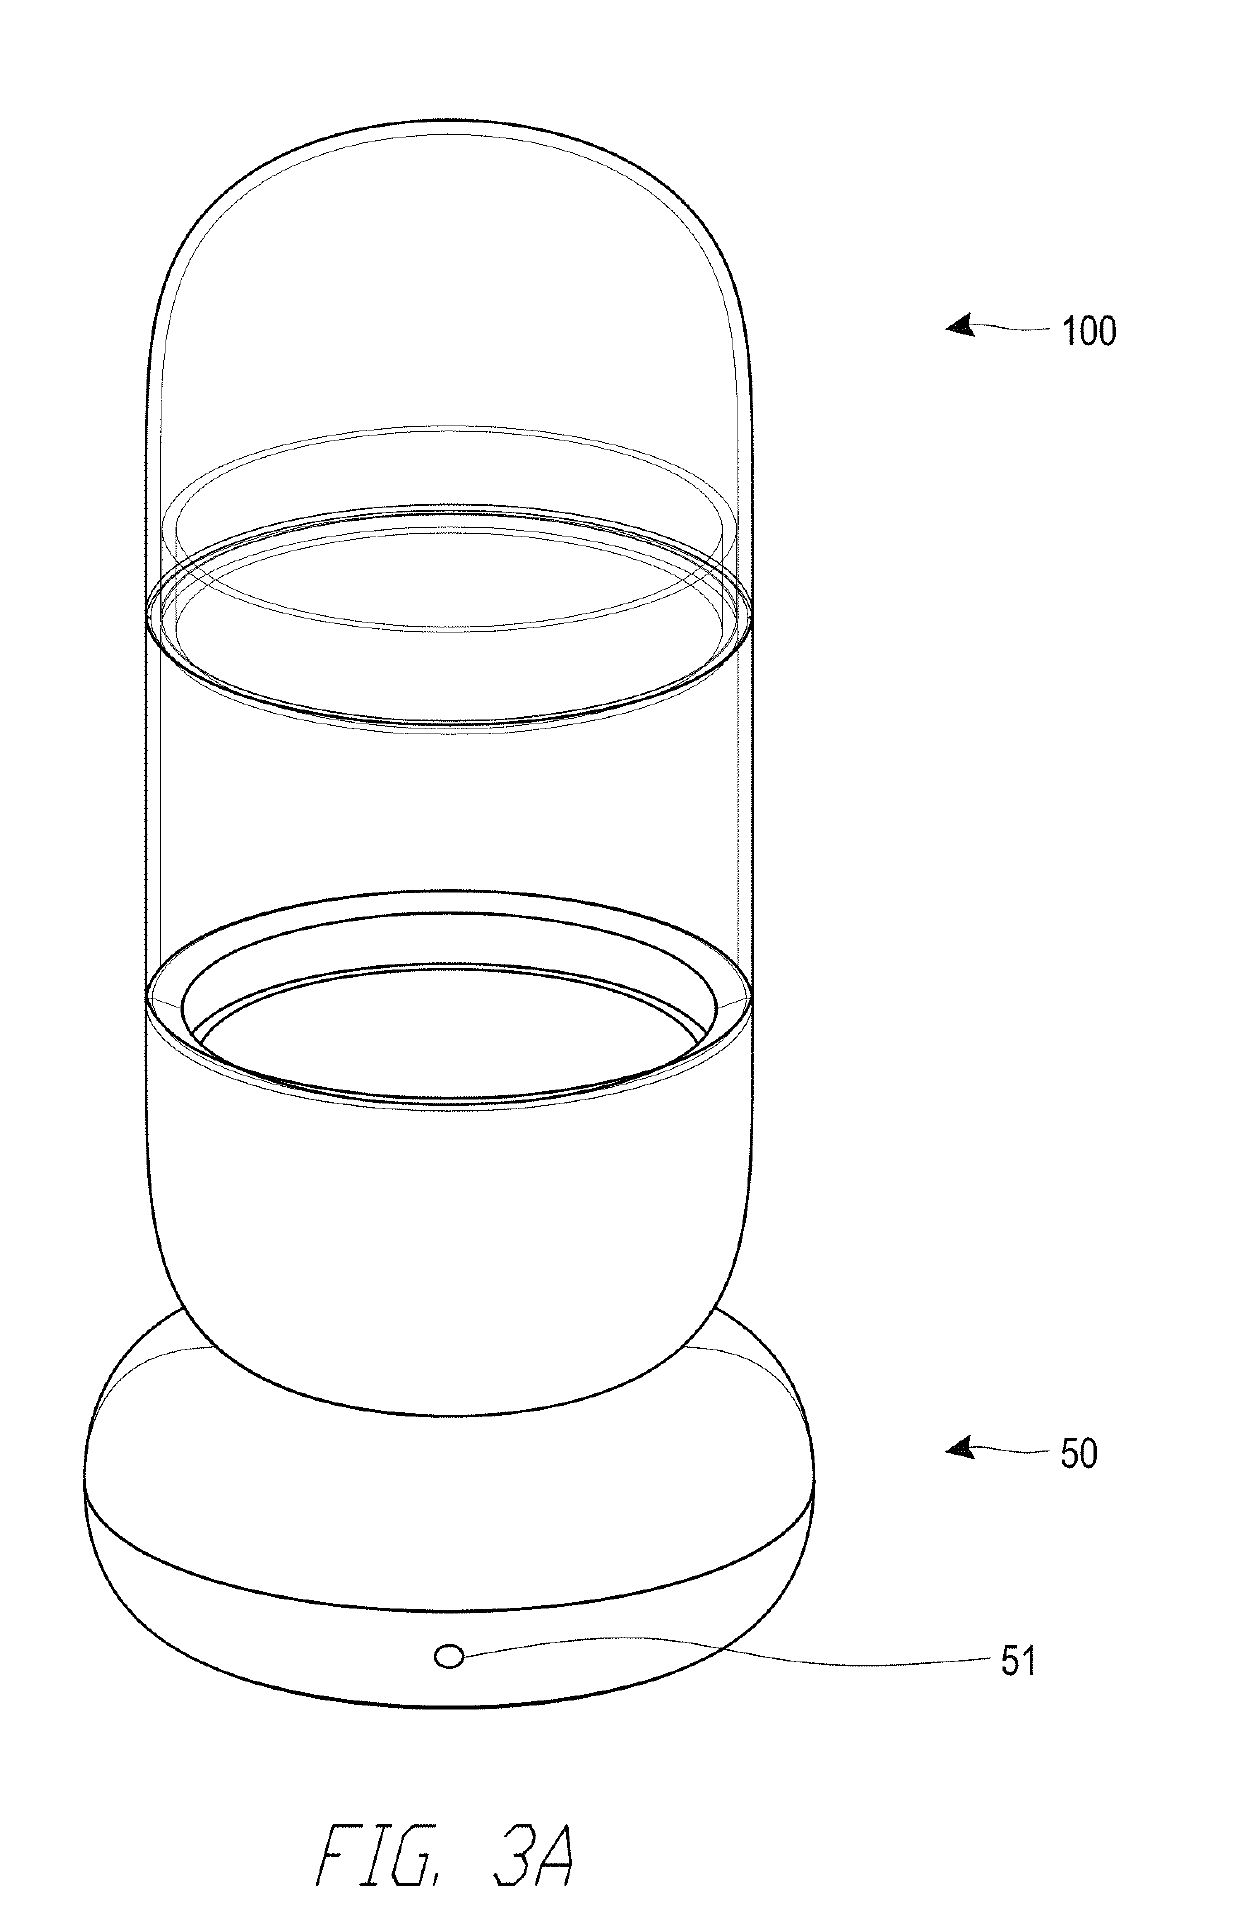 Actively heated or cooled infant bottle system